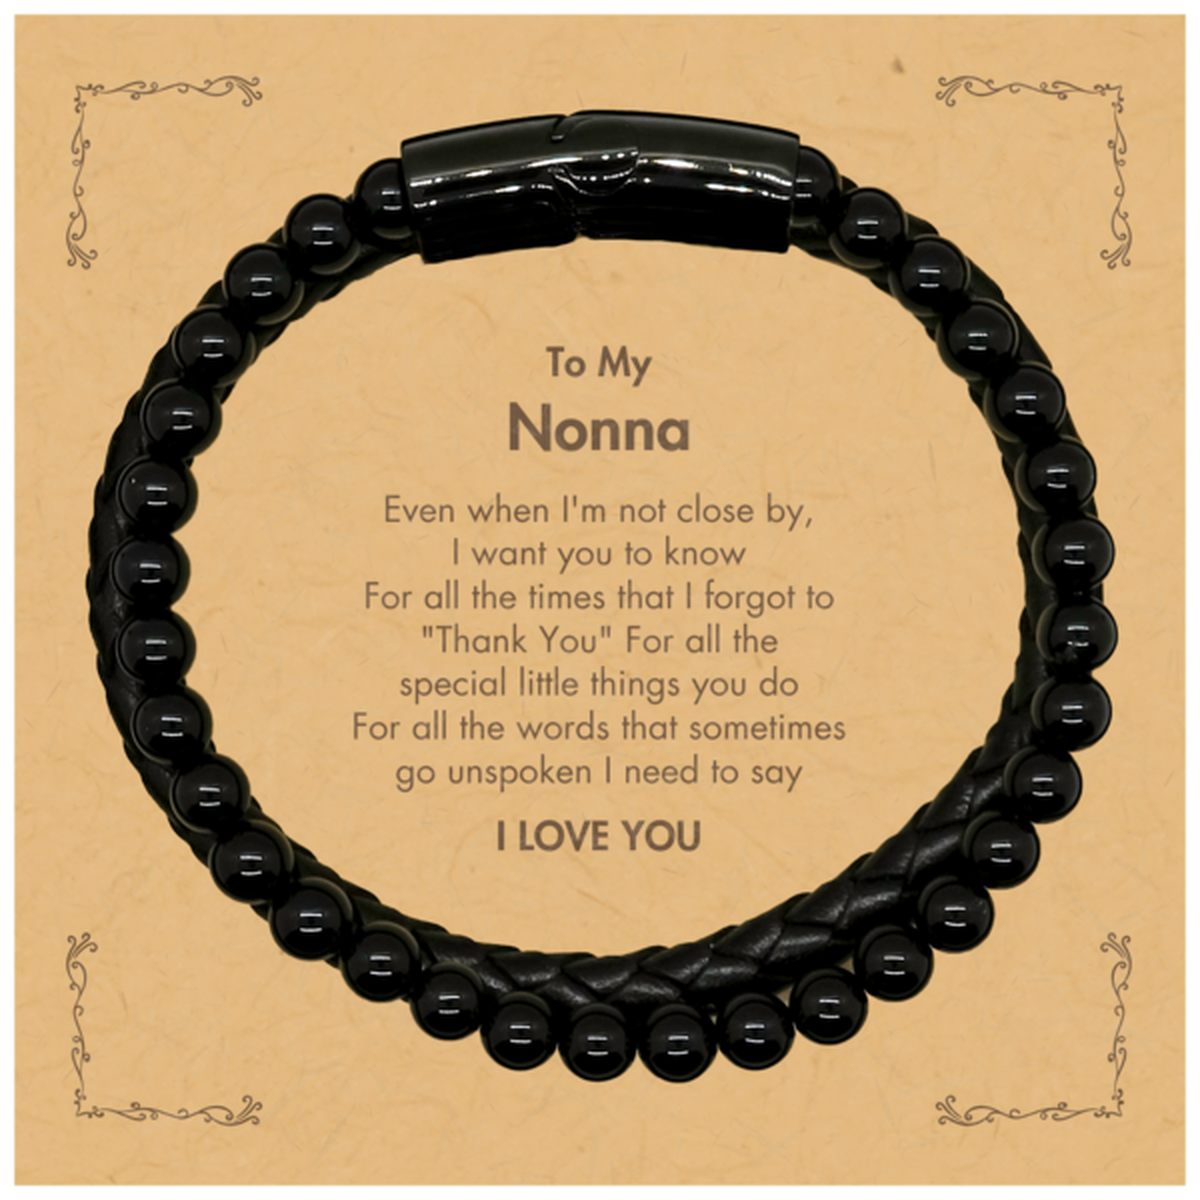 Thank You Gifts for Nonna, Keepsake Stone Leather Bracelets Gifts for Nonna Birthday Mother's day Father's Day Nonna For all the words That sometimes go unspoken I need to say I LOVE YOU